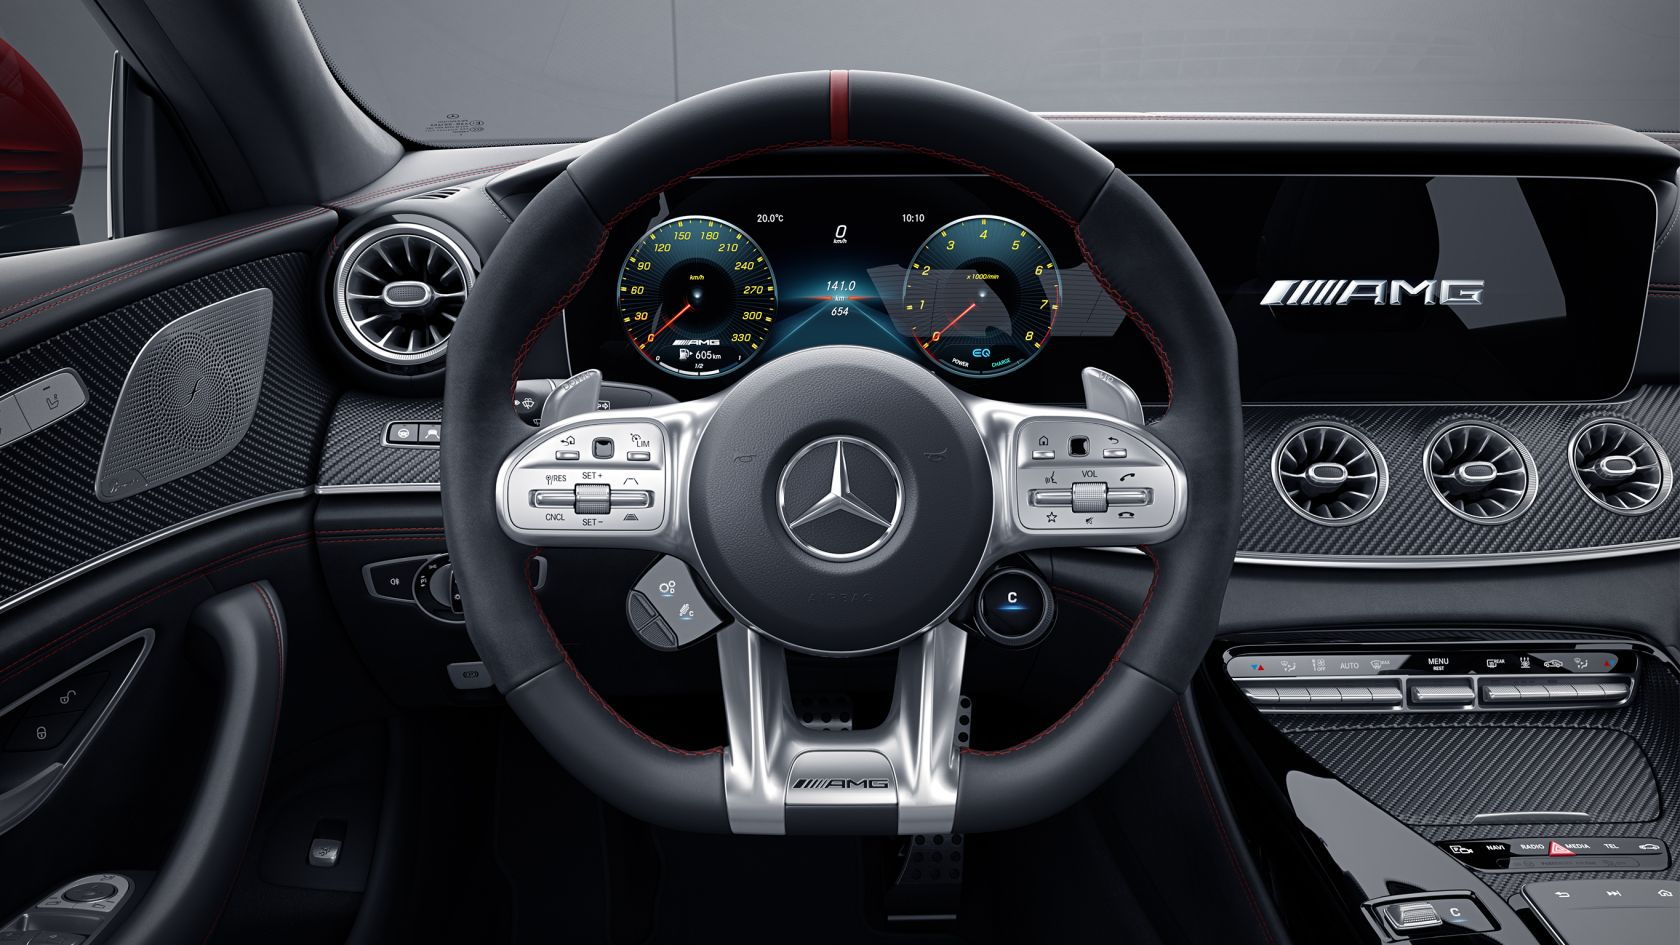 The Mercedes-Benz AMG Steering Wheel features advanced technology for enhanced driving performance.